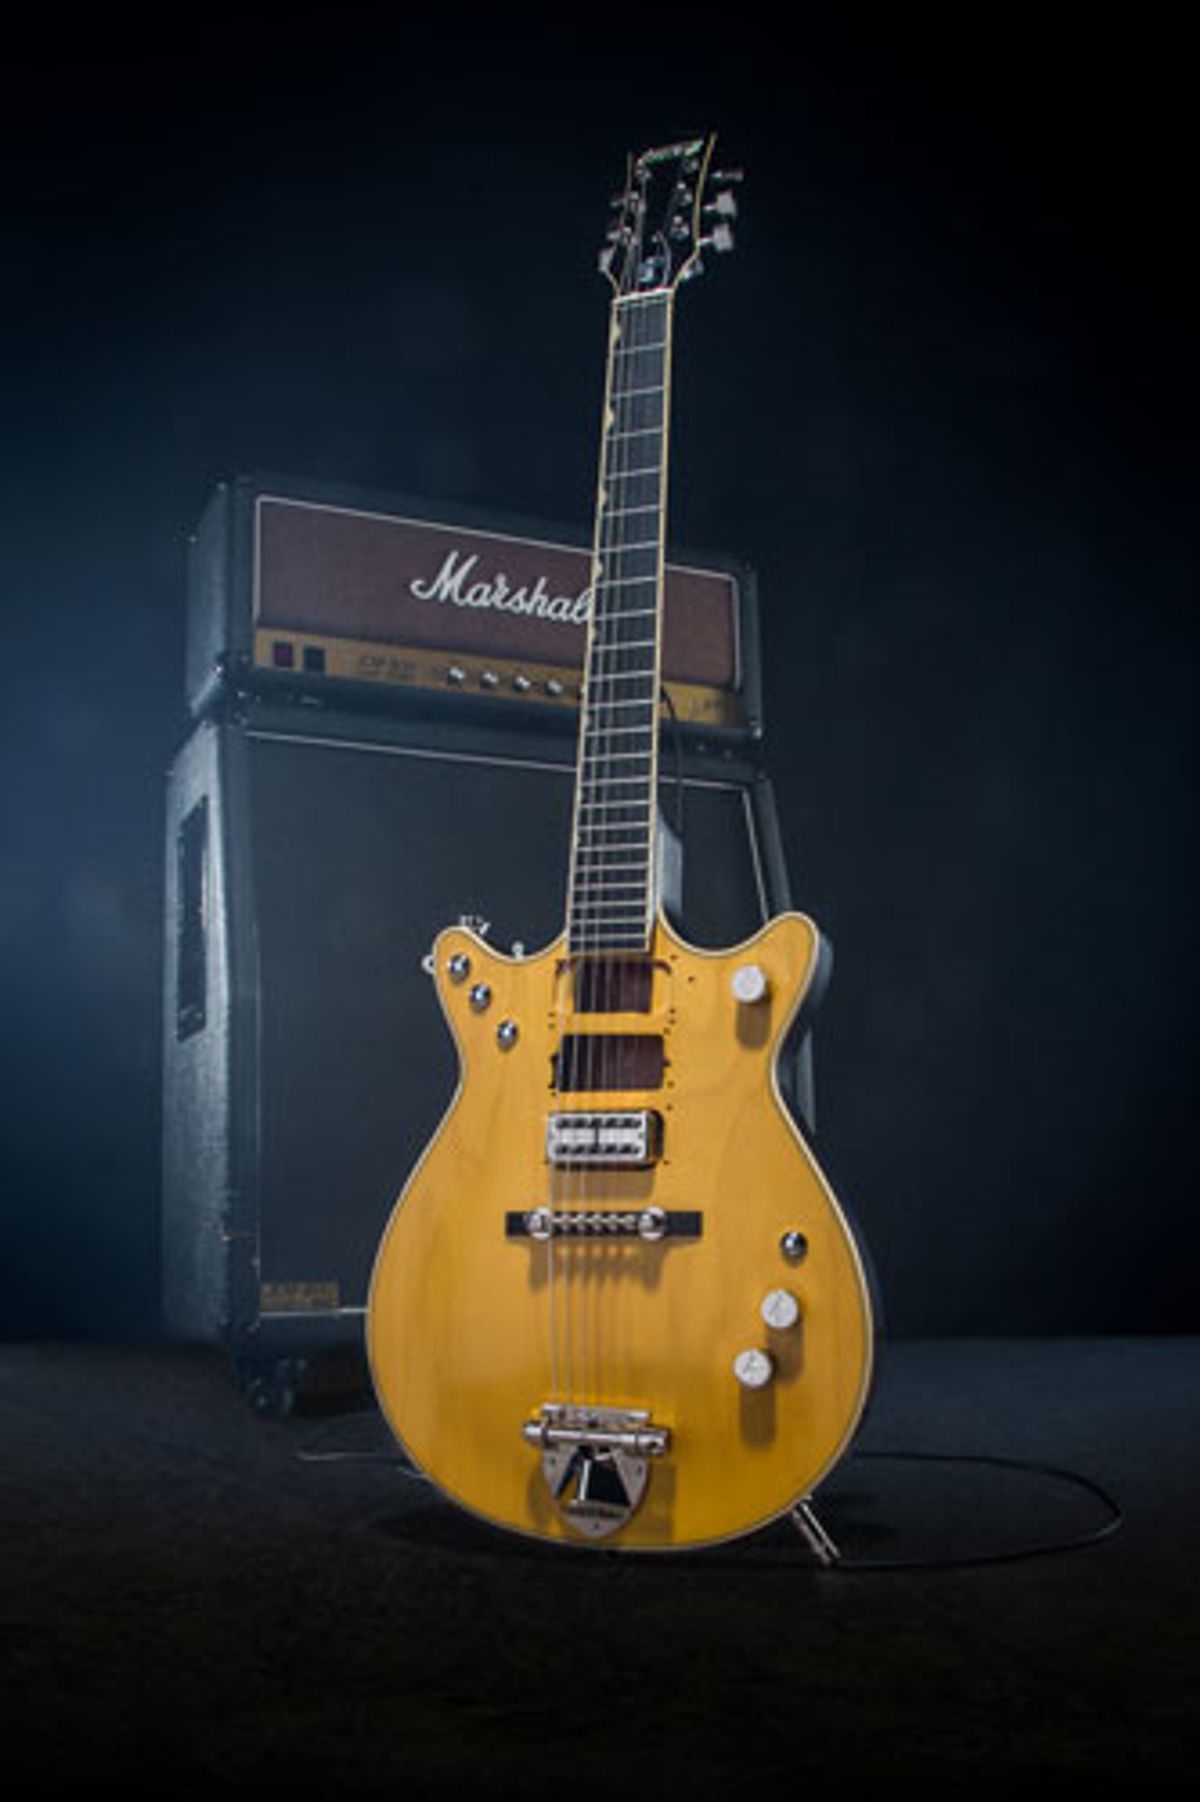 Gretsch Honors Malcolm Young with Signature Jet